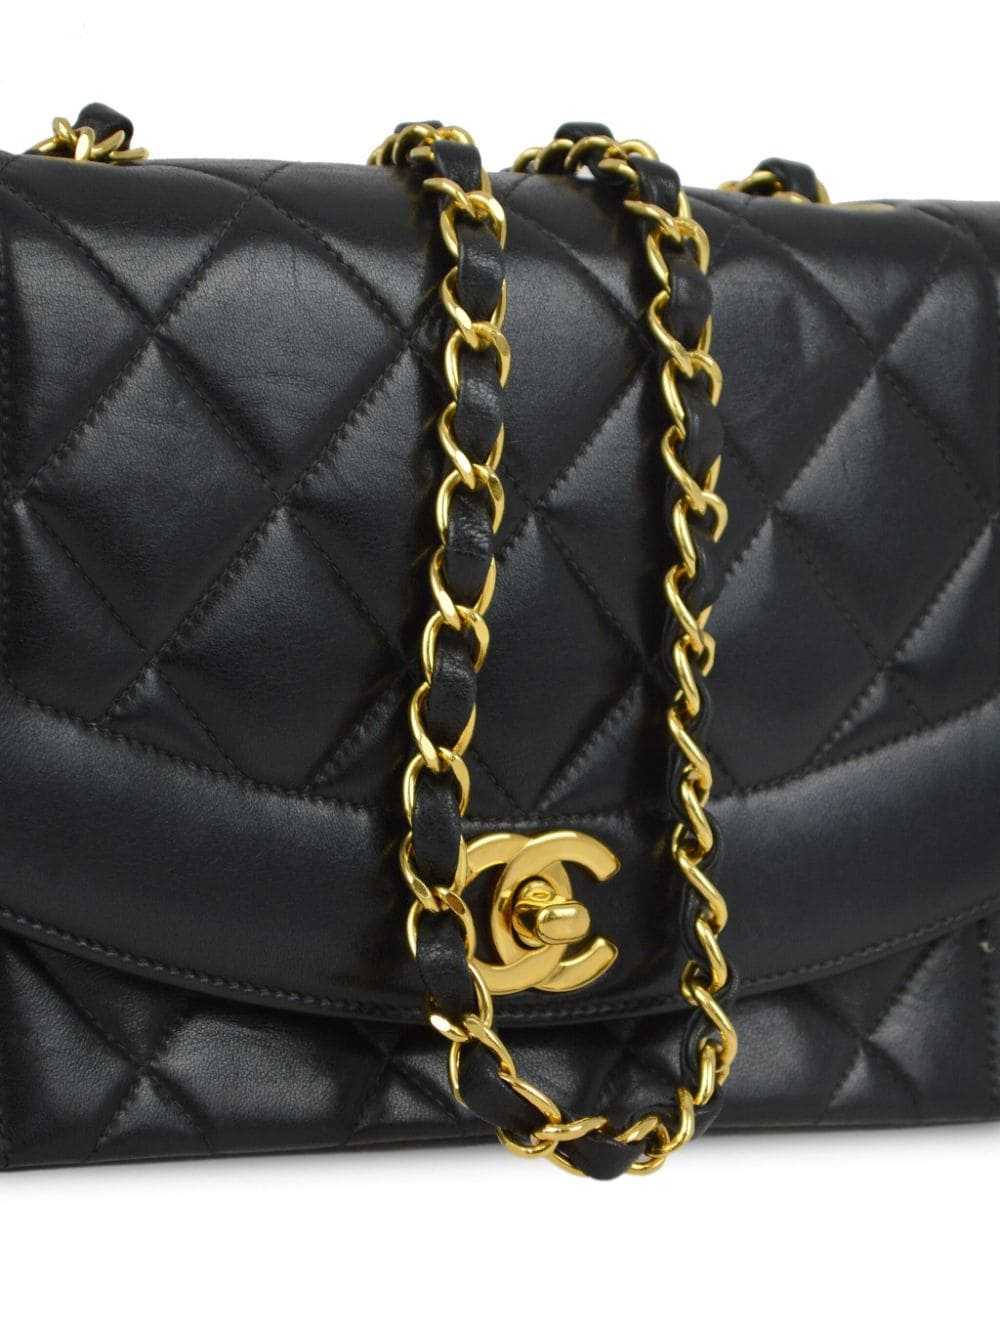 CHANEL Pre-Owned 1997 small Diana shoulder bag - … - image 3